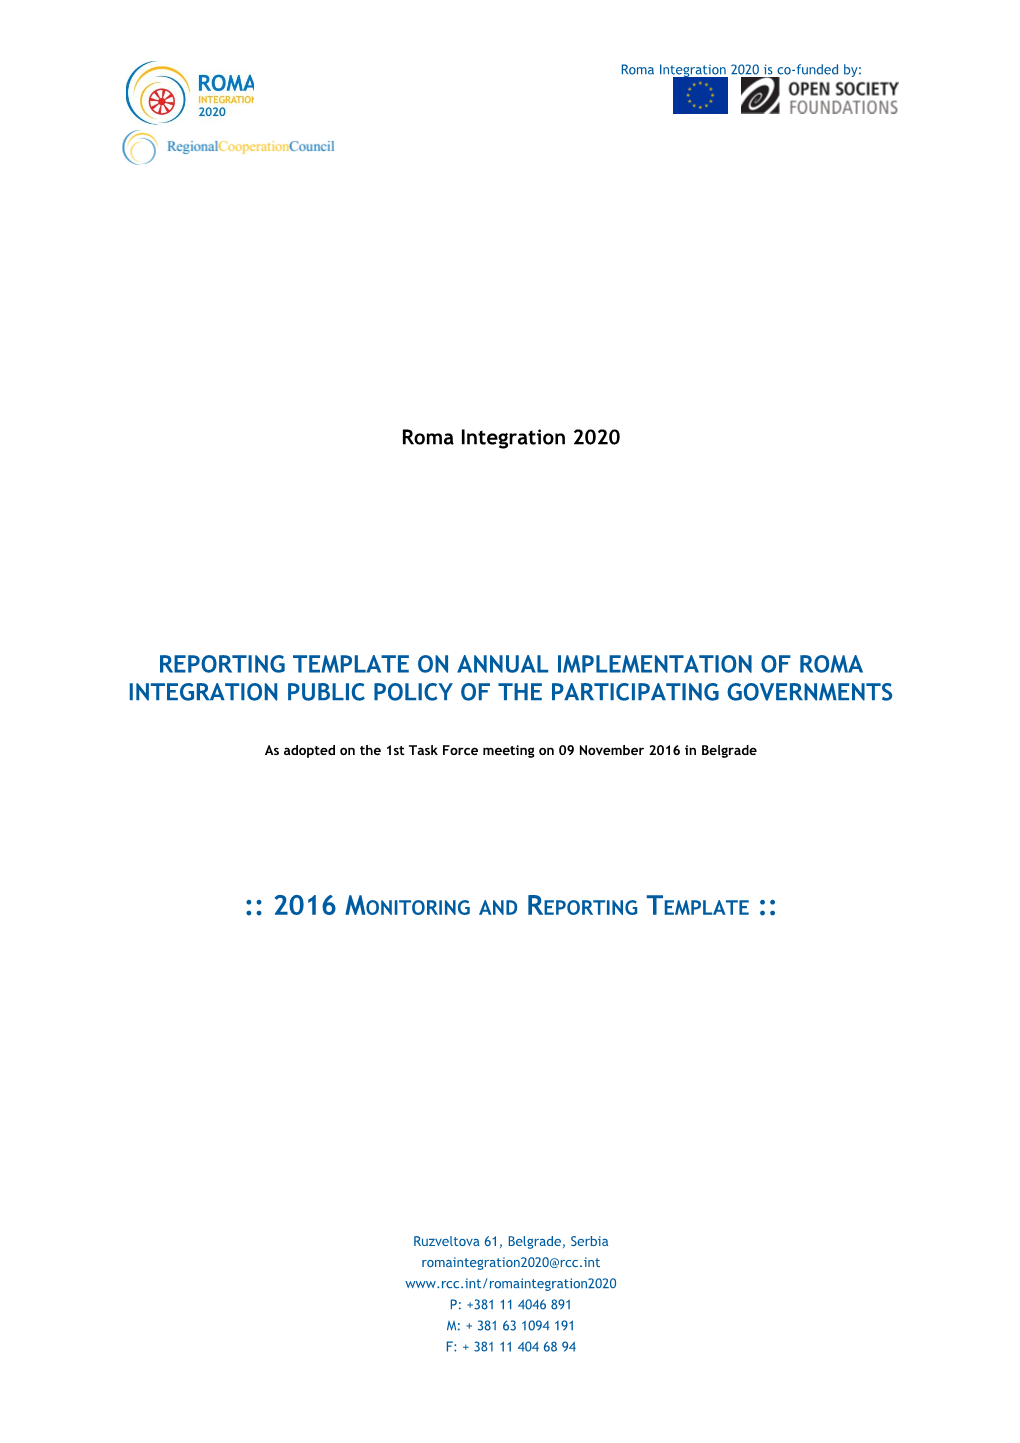 Reporting Template on Annual Implementation of Roma Integration Public Policy of The